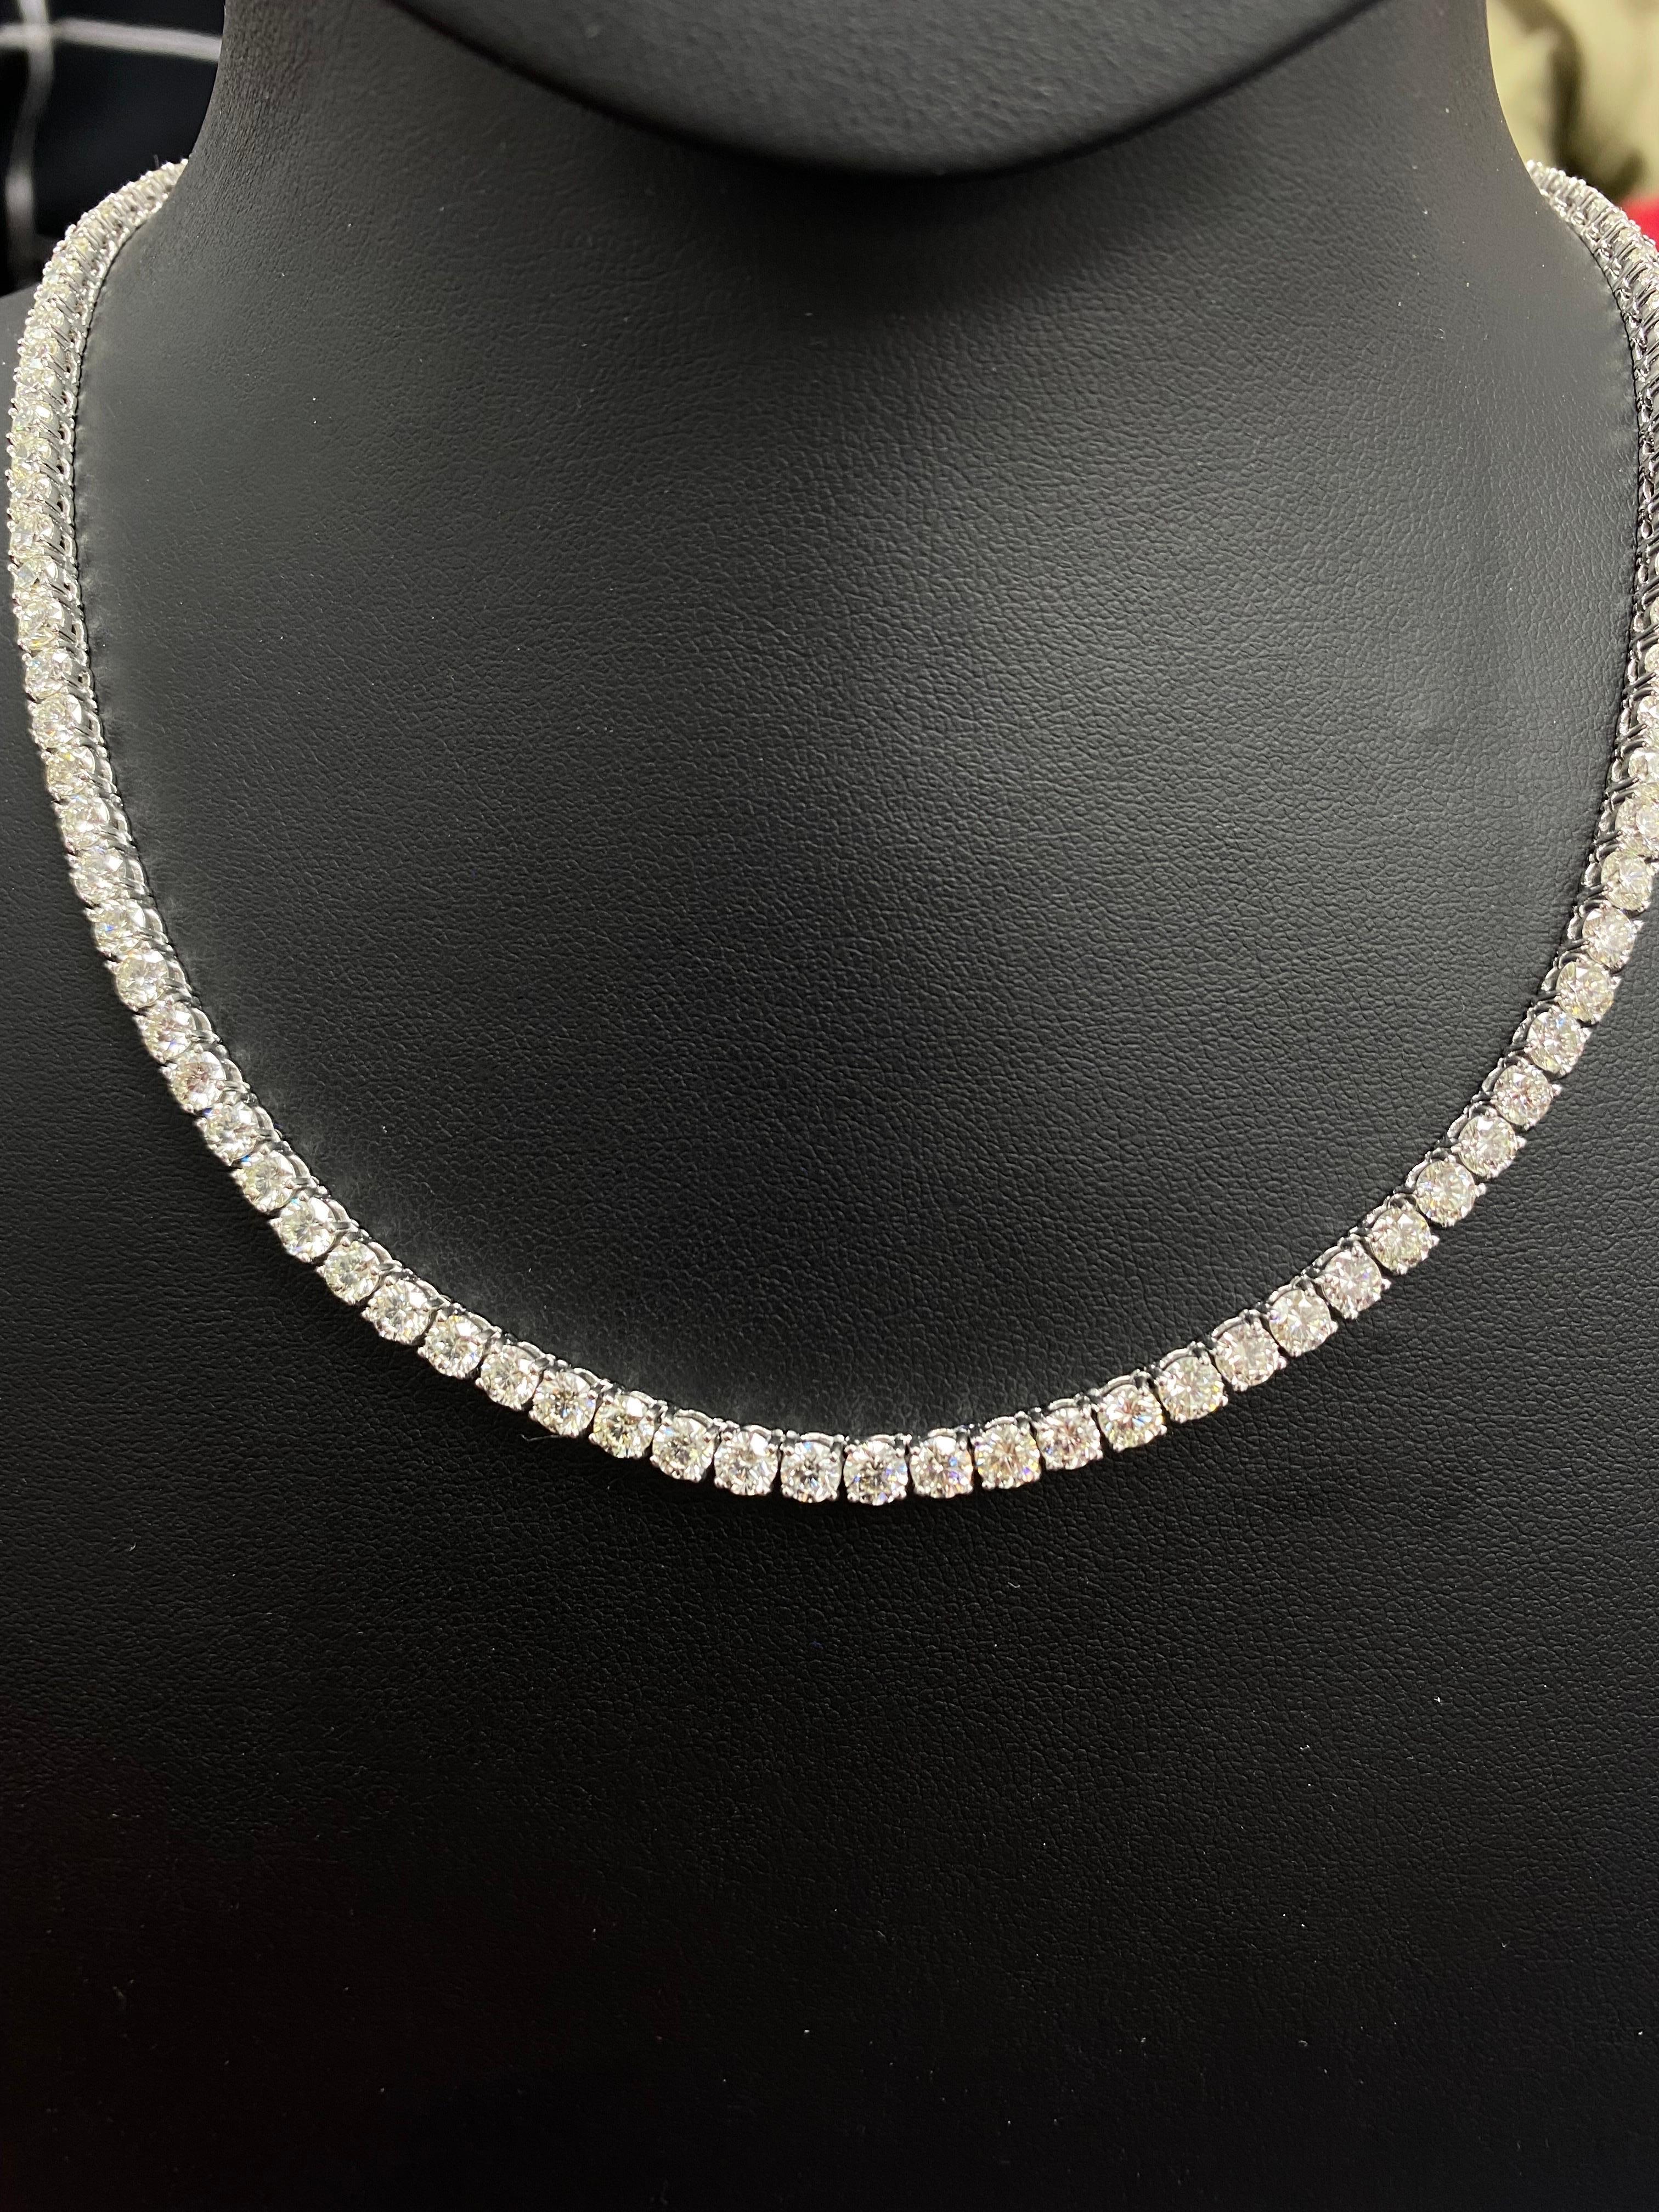 This diamond tennis necklace features beautifully cut round diamonds set gorgeously in solid 18k white gold. Customization available - for tennis necklaces and bracelet. Please feel free to message us for more information. We provide